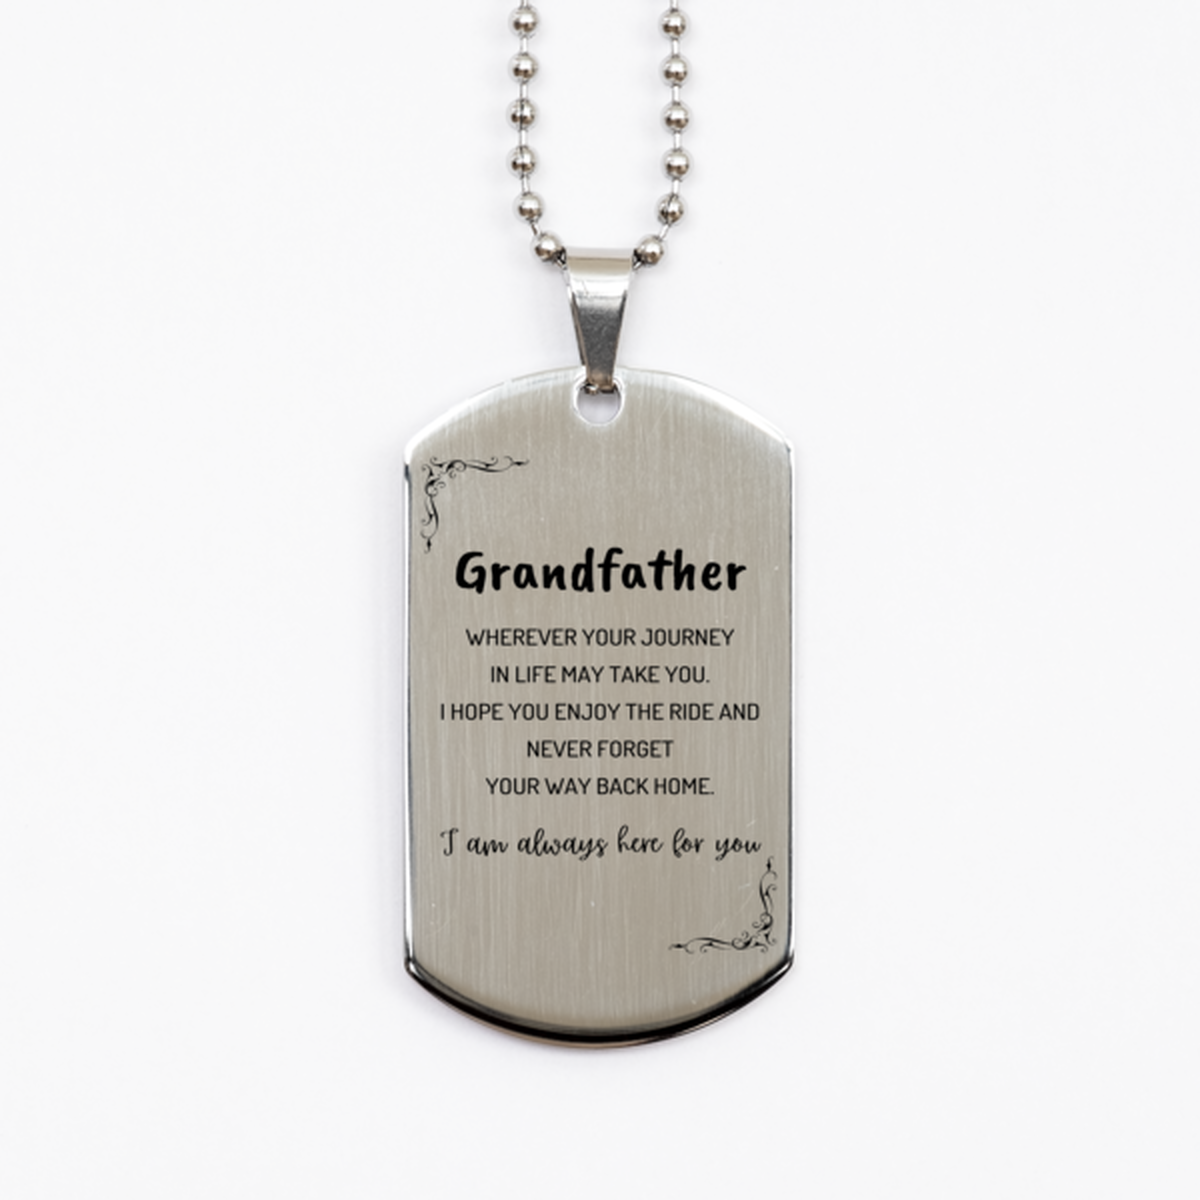 Grandfather wherever your journey in life may take you, I am always here for you Grandfather Silver Dog Tag, Awesome Christmas Gifts For Grandfather, Grandfather Birthday Gifts for Men Women Family Loved One